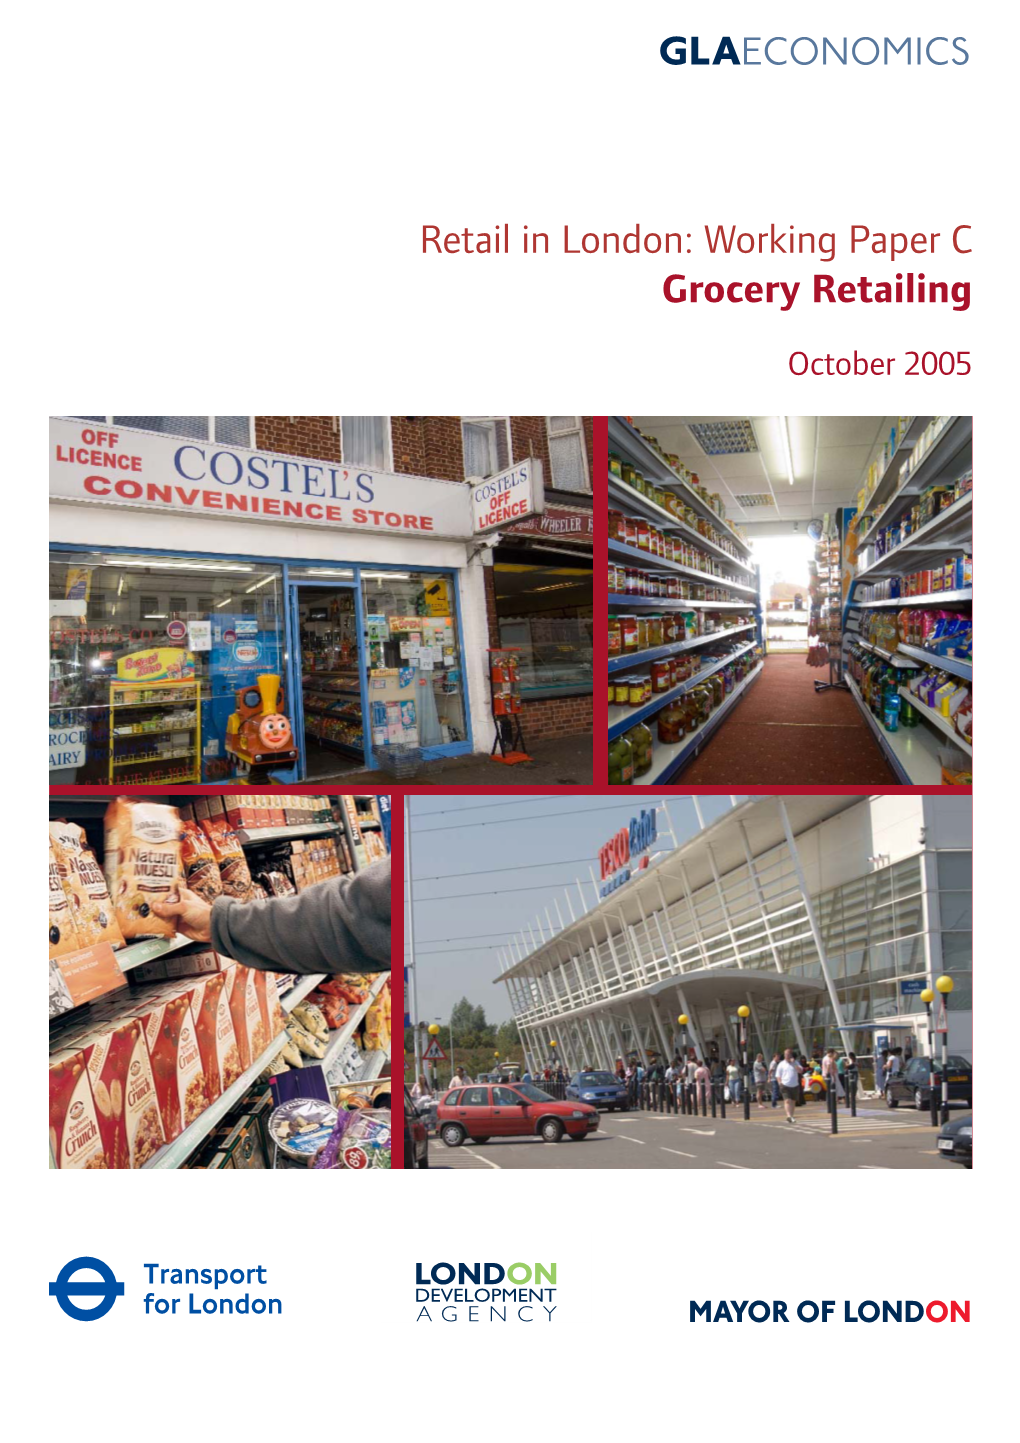 Working Paper C Grocery Retailing